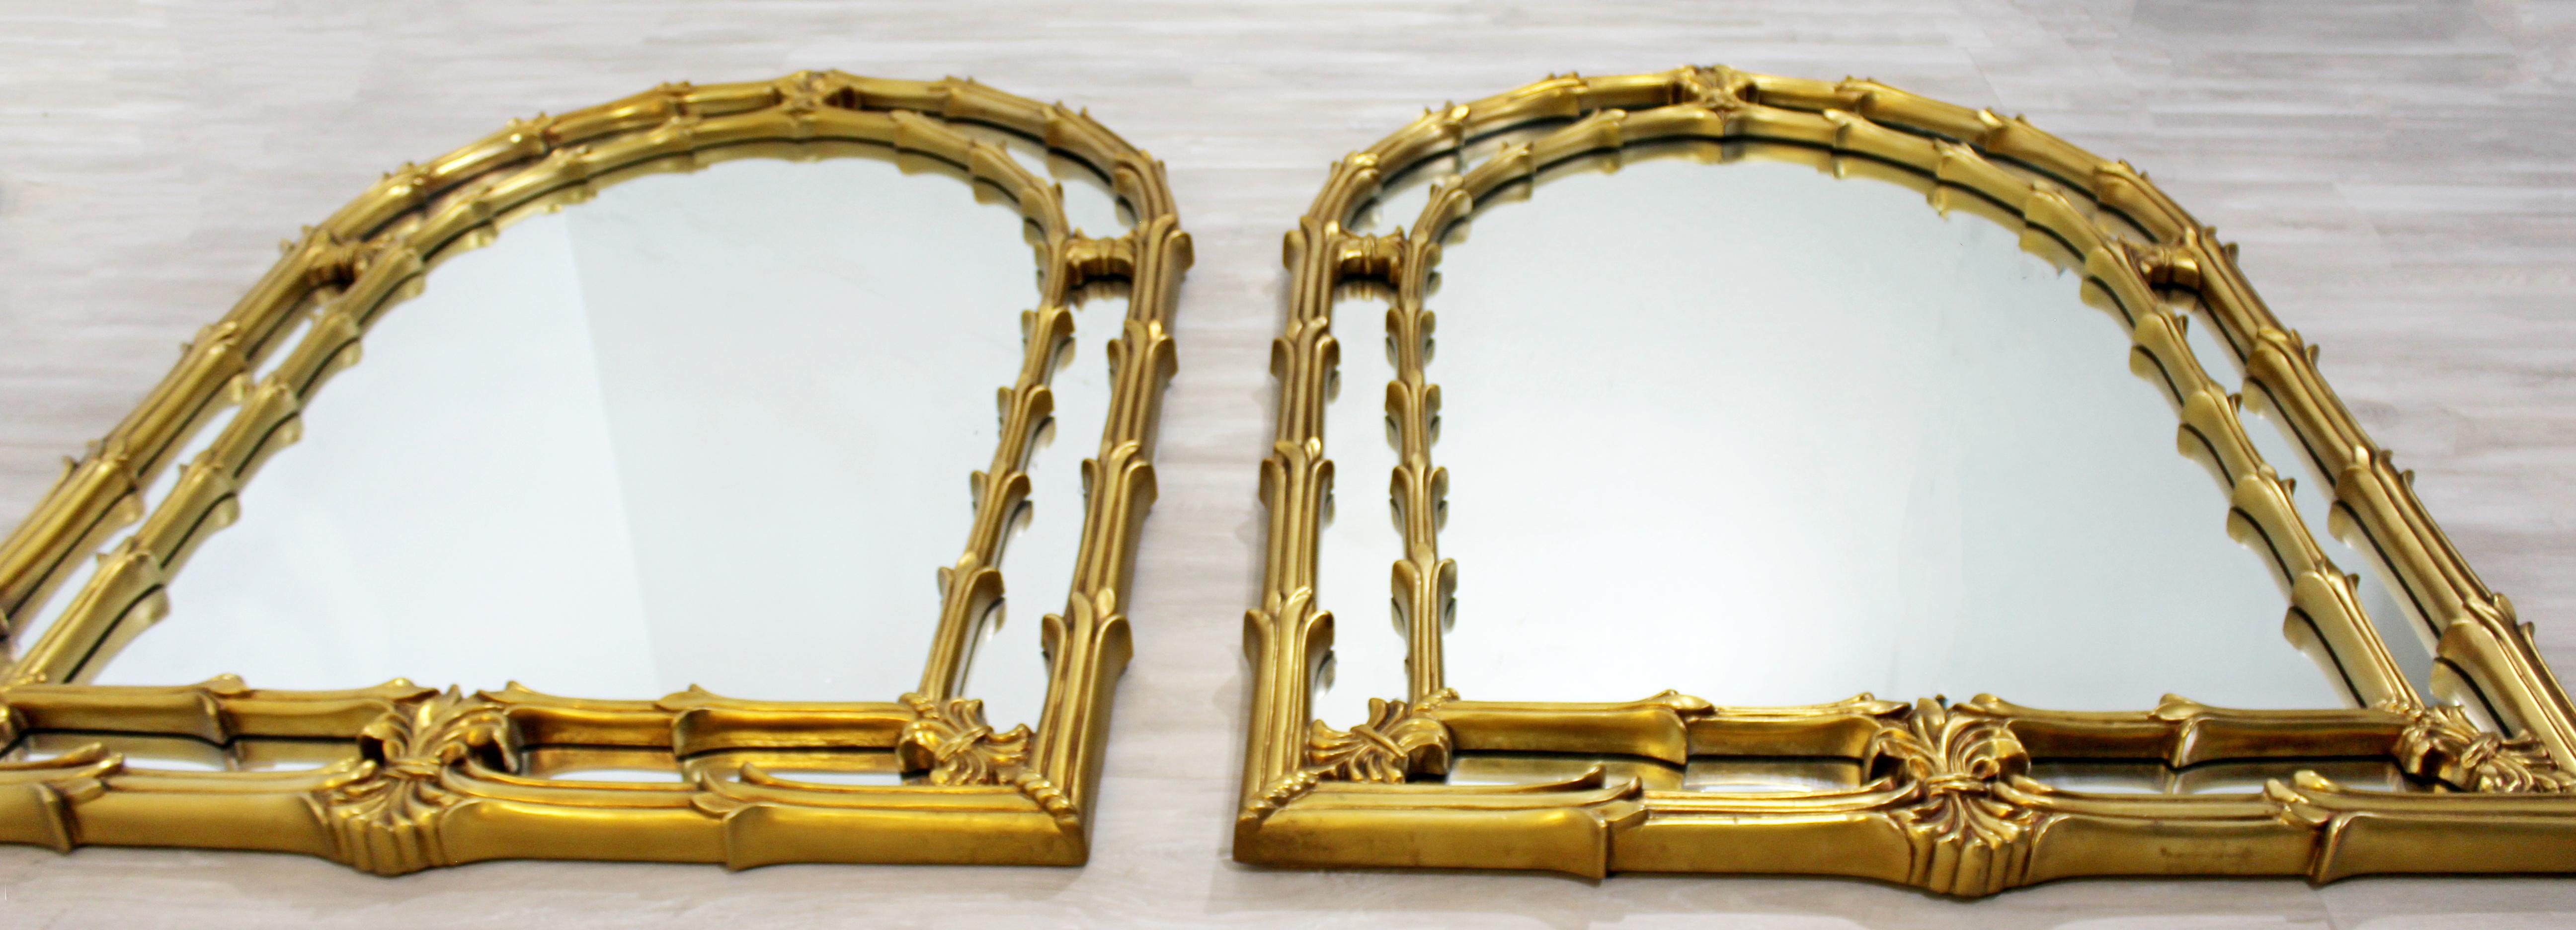 For your consideration is a magnificent pair of monumental size, gold gilt, arched art mirrors. In excellent vintage condition. The dimensions of each are 34